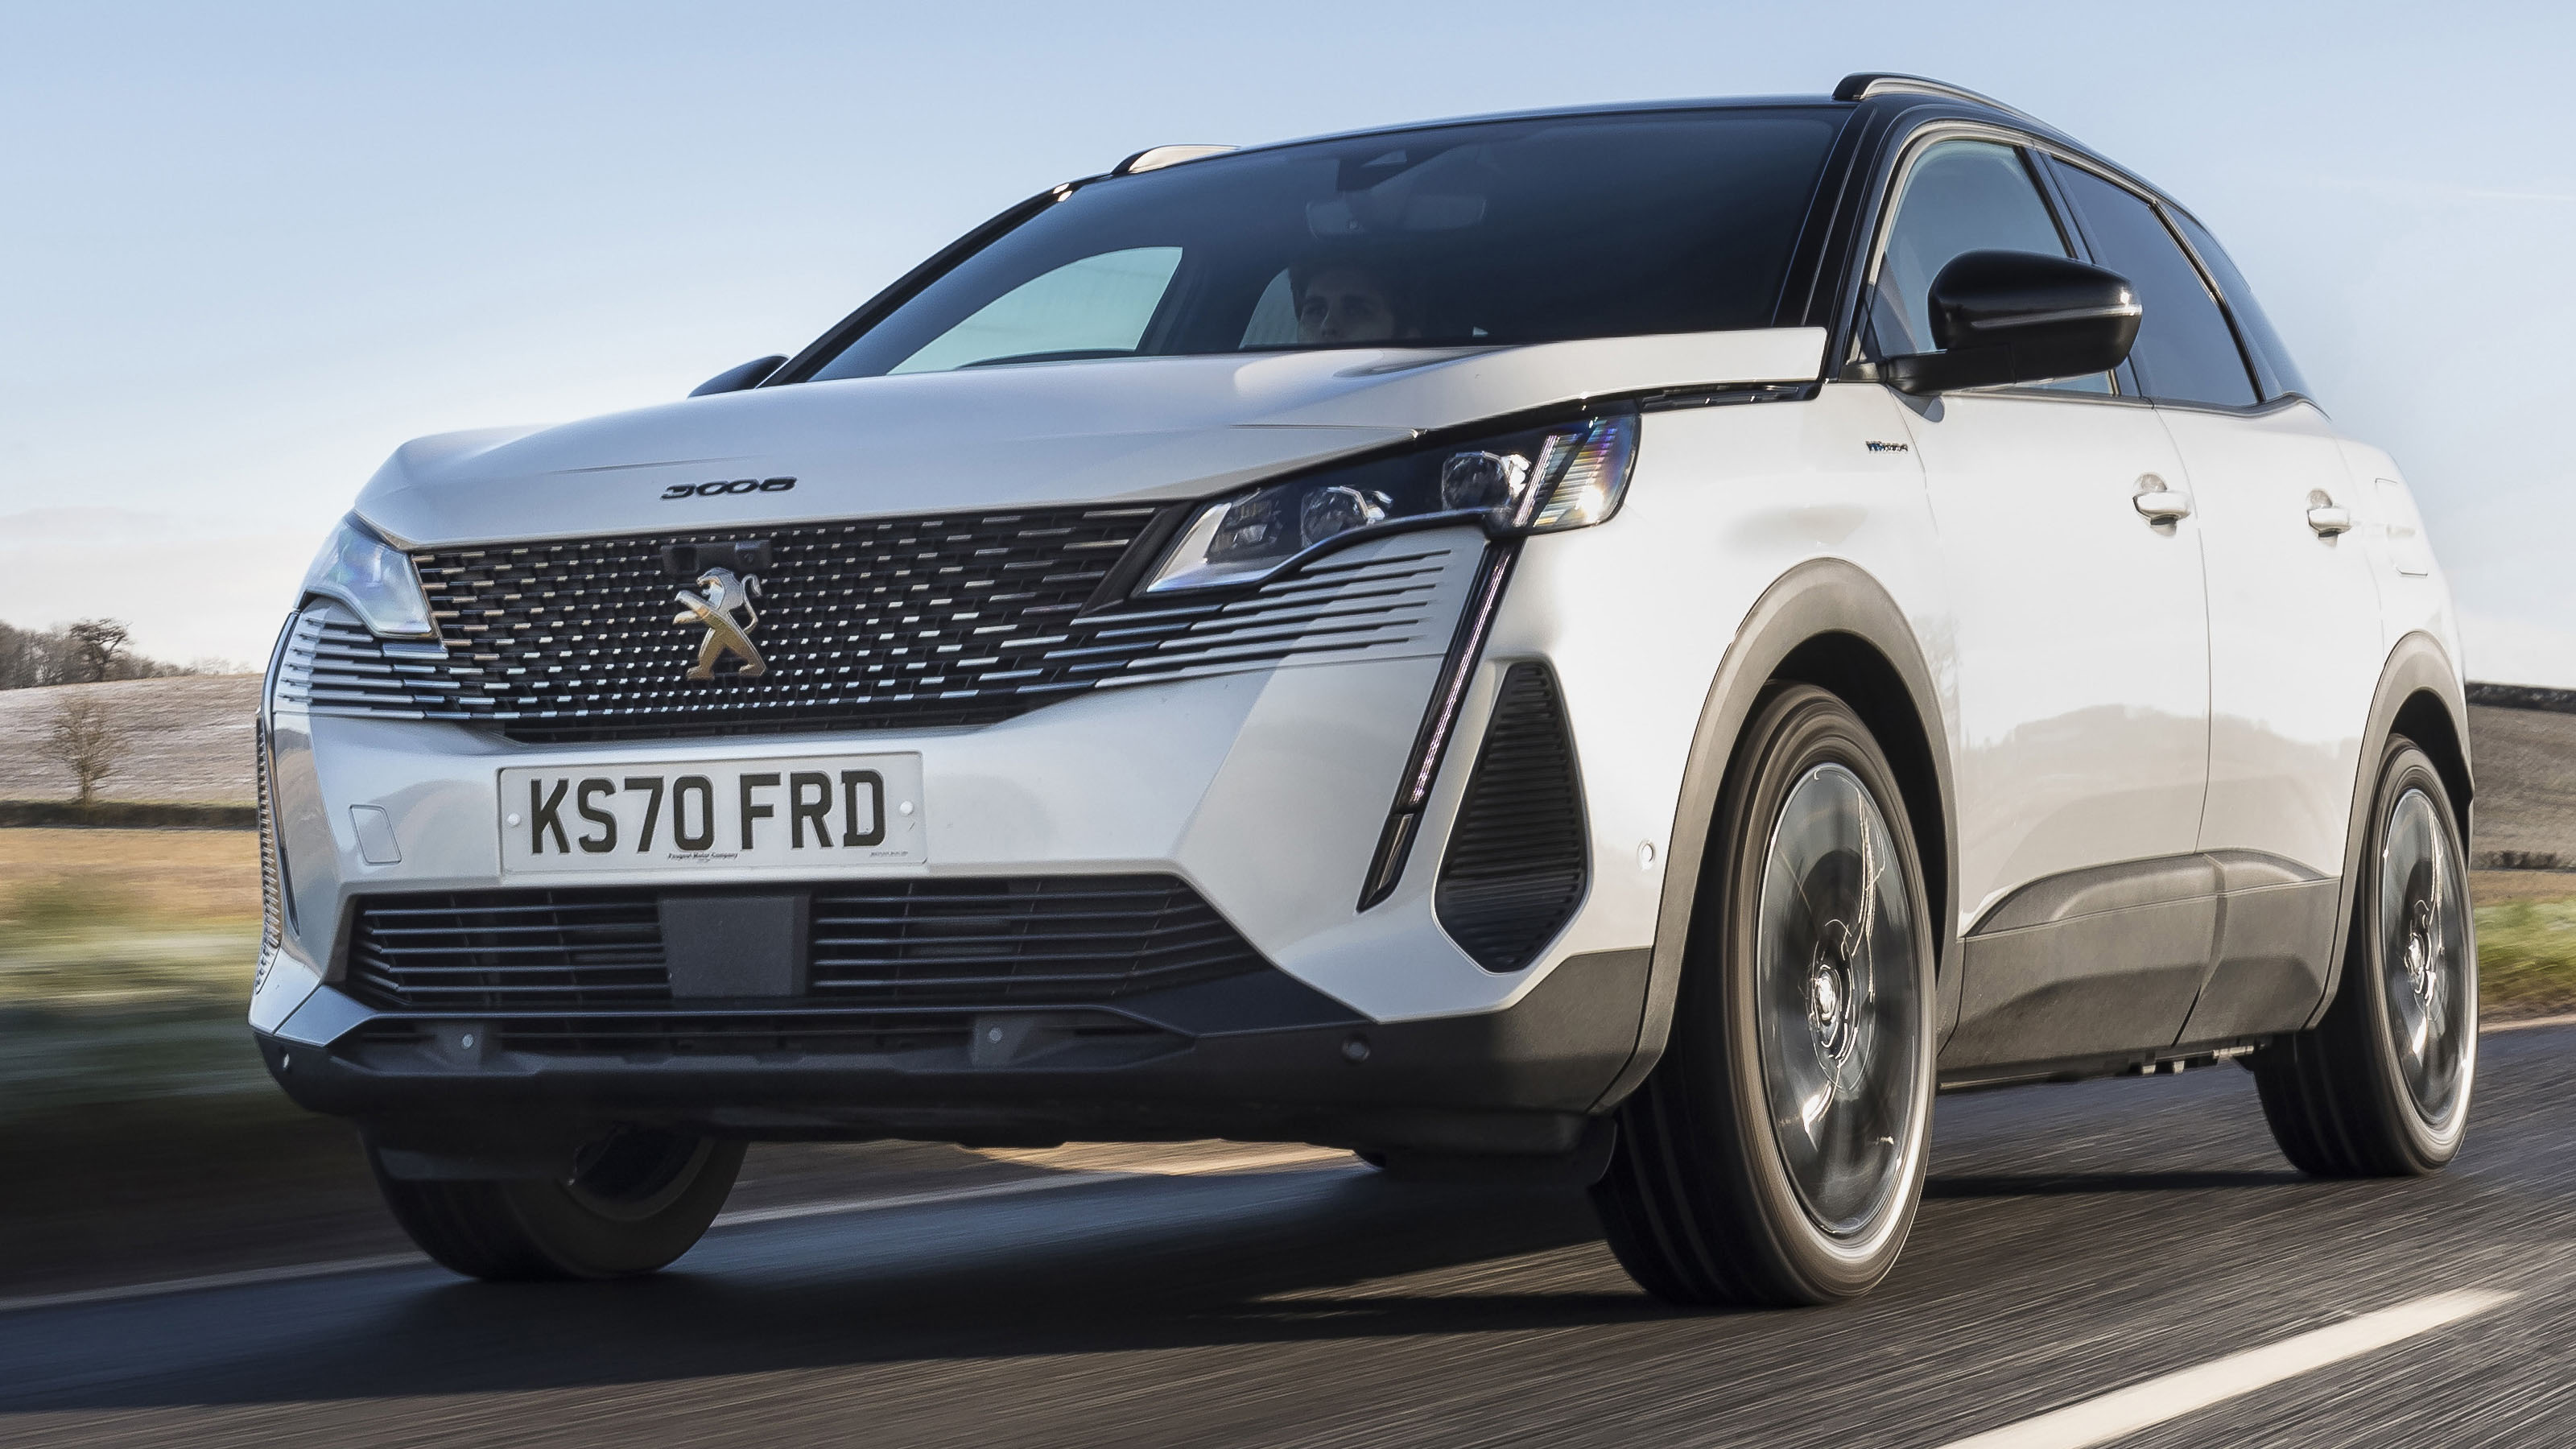 All-New Peugeot 3008 Crossover Coupe Launches in Hybrid and